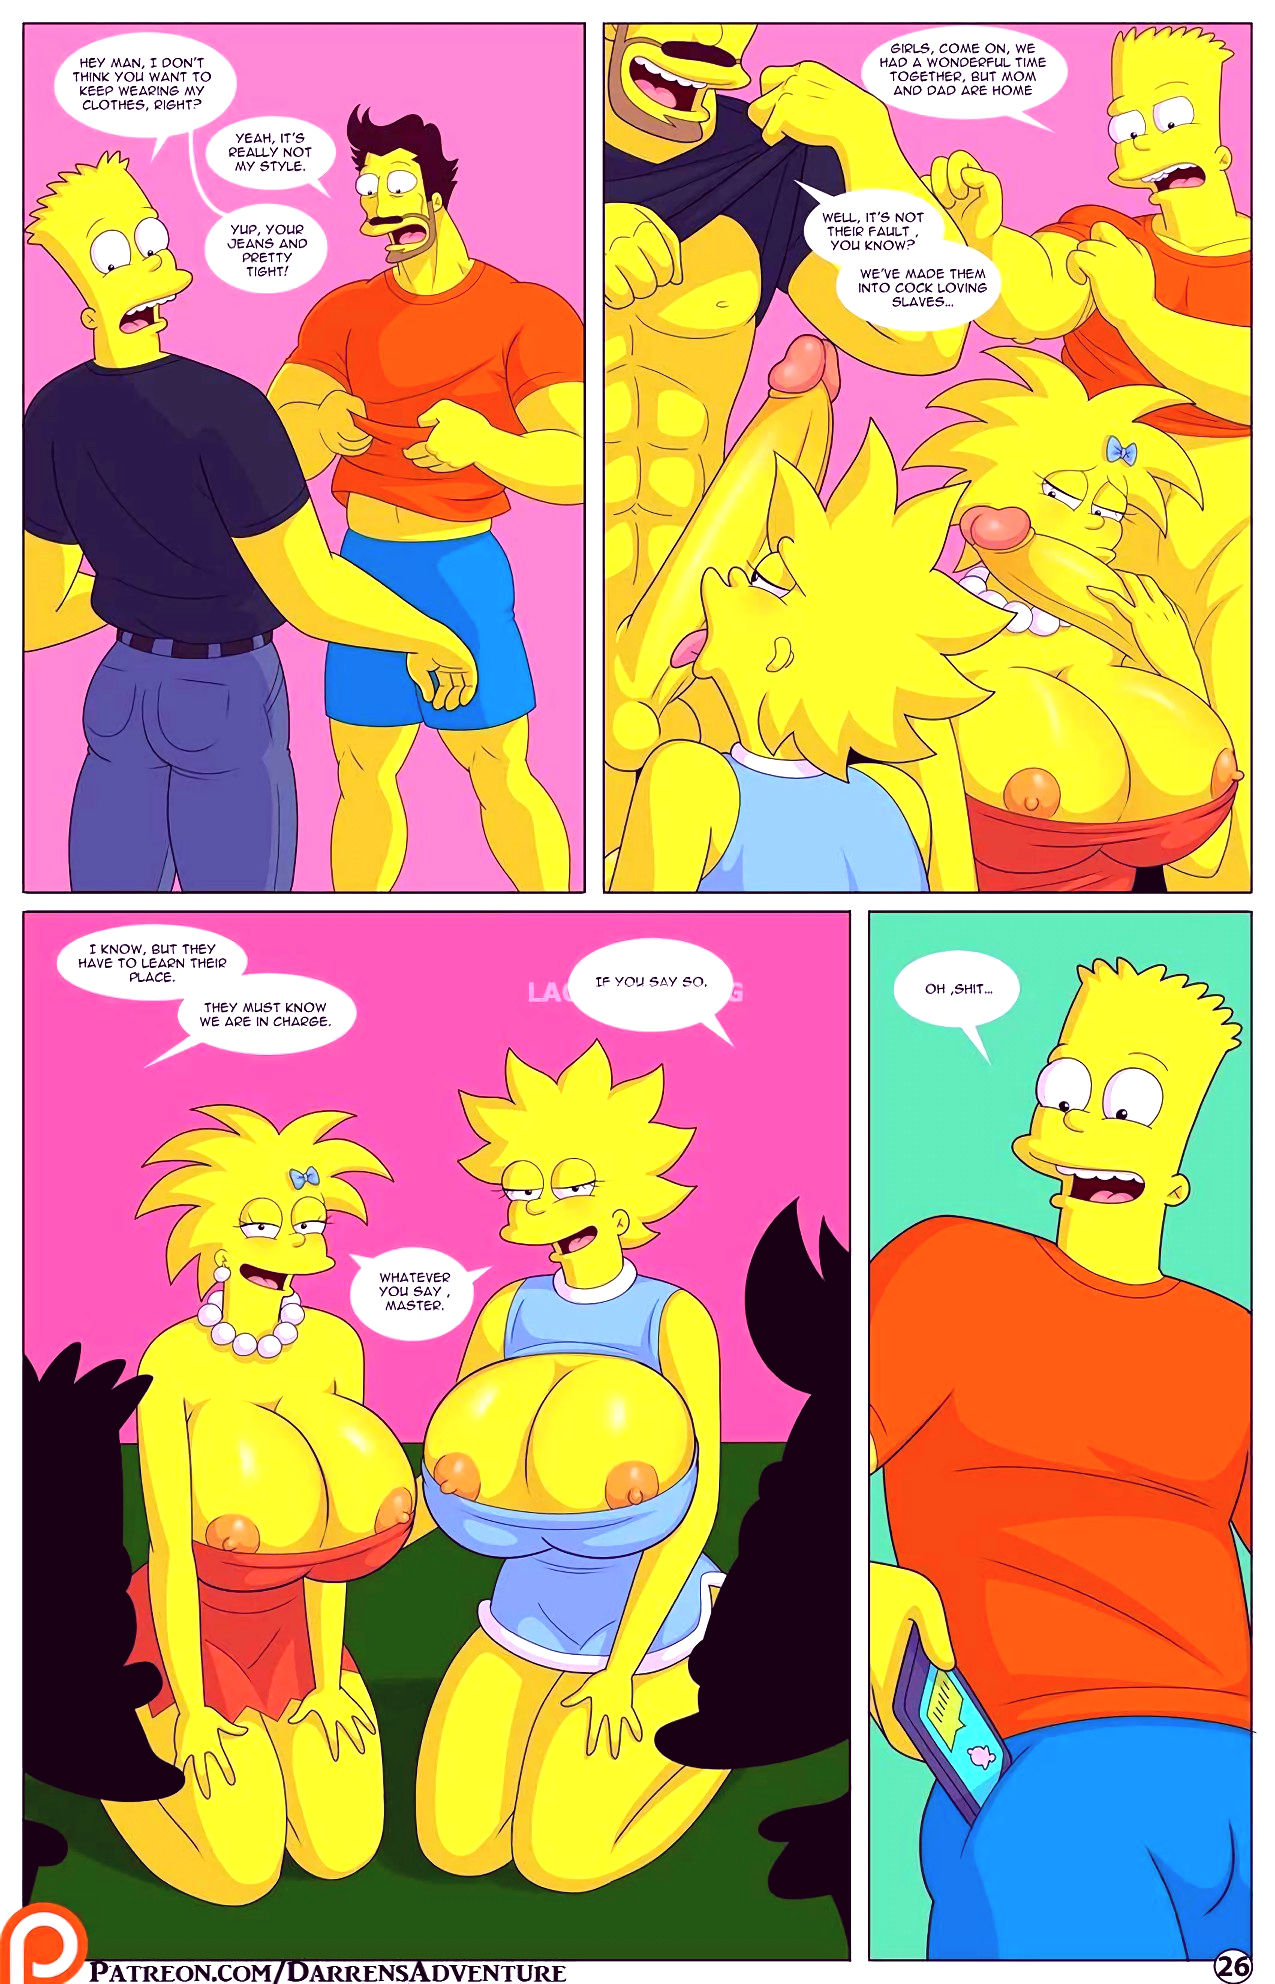 Darrens adventure or welcome to springfield porn comic picture 104